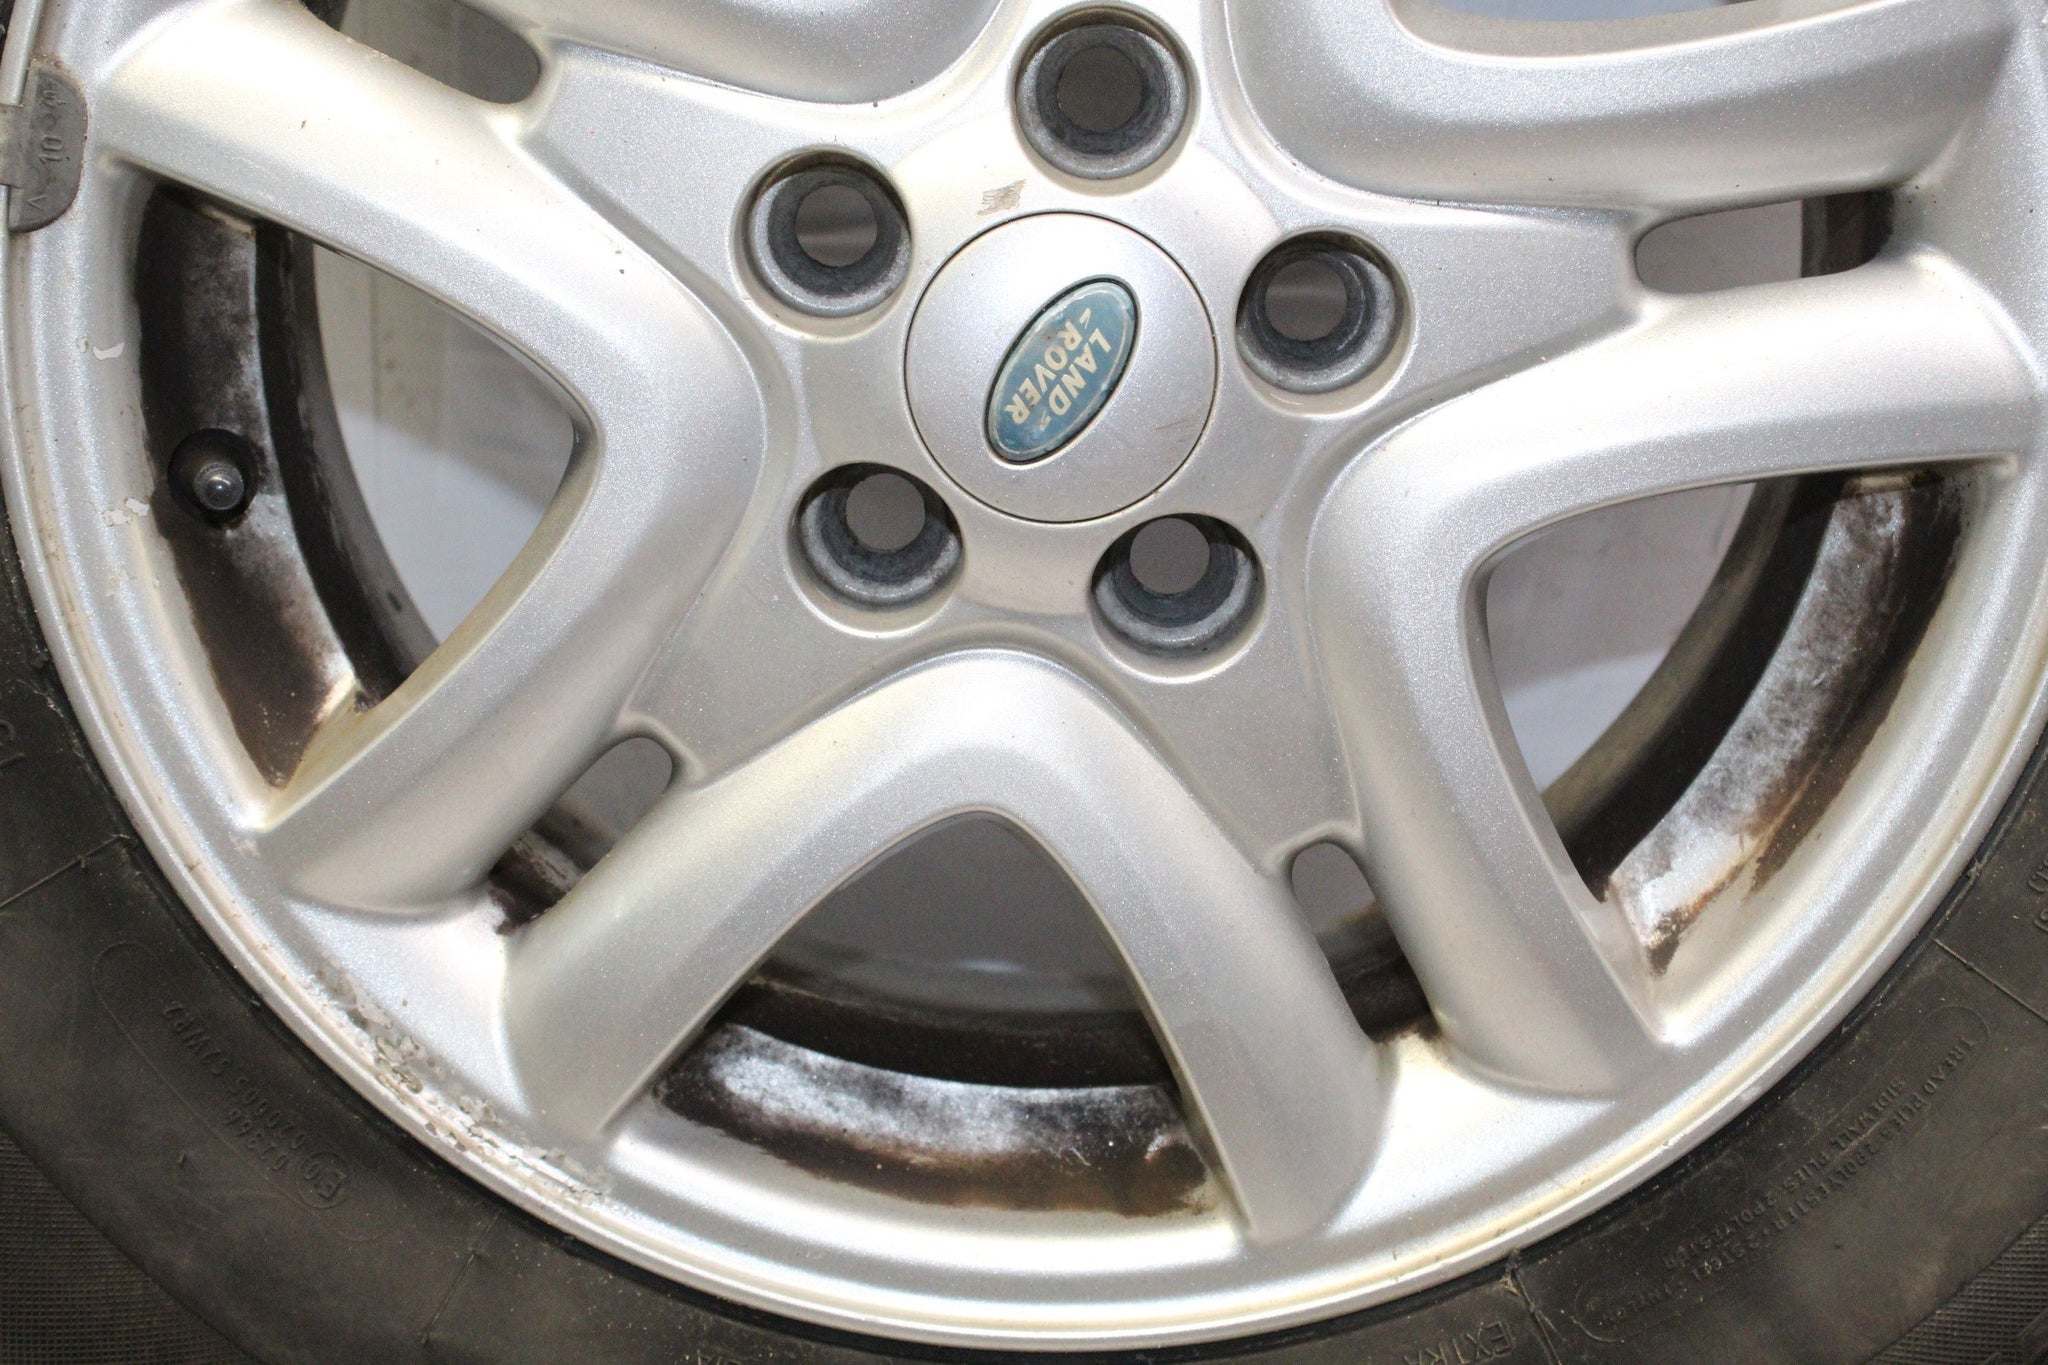 2007 Land Rover Freelander 2 ALLOY WHEEL WITH TYRE 225 / 75 R16 5.3MM